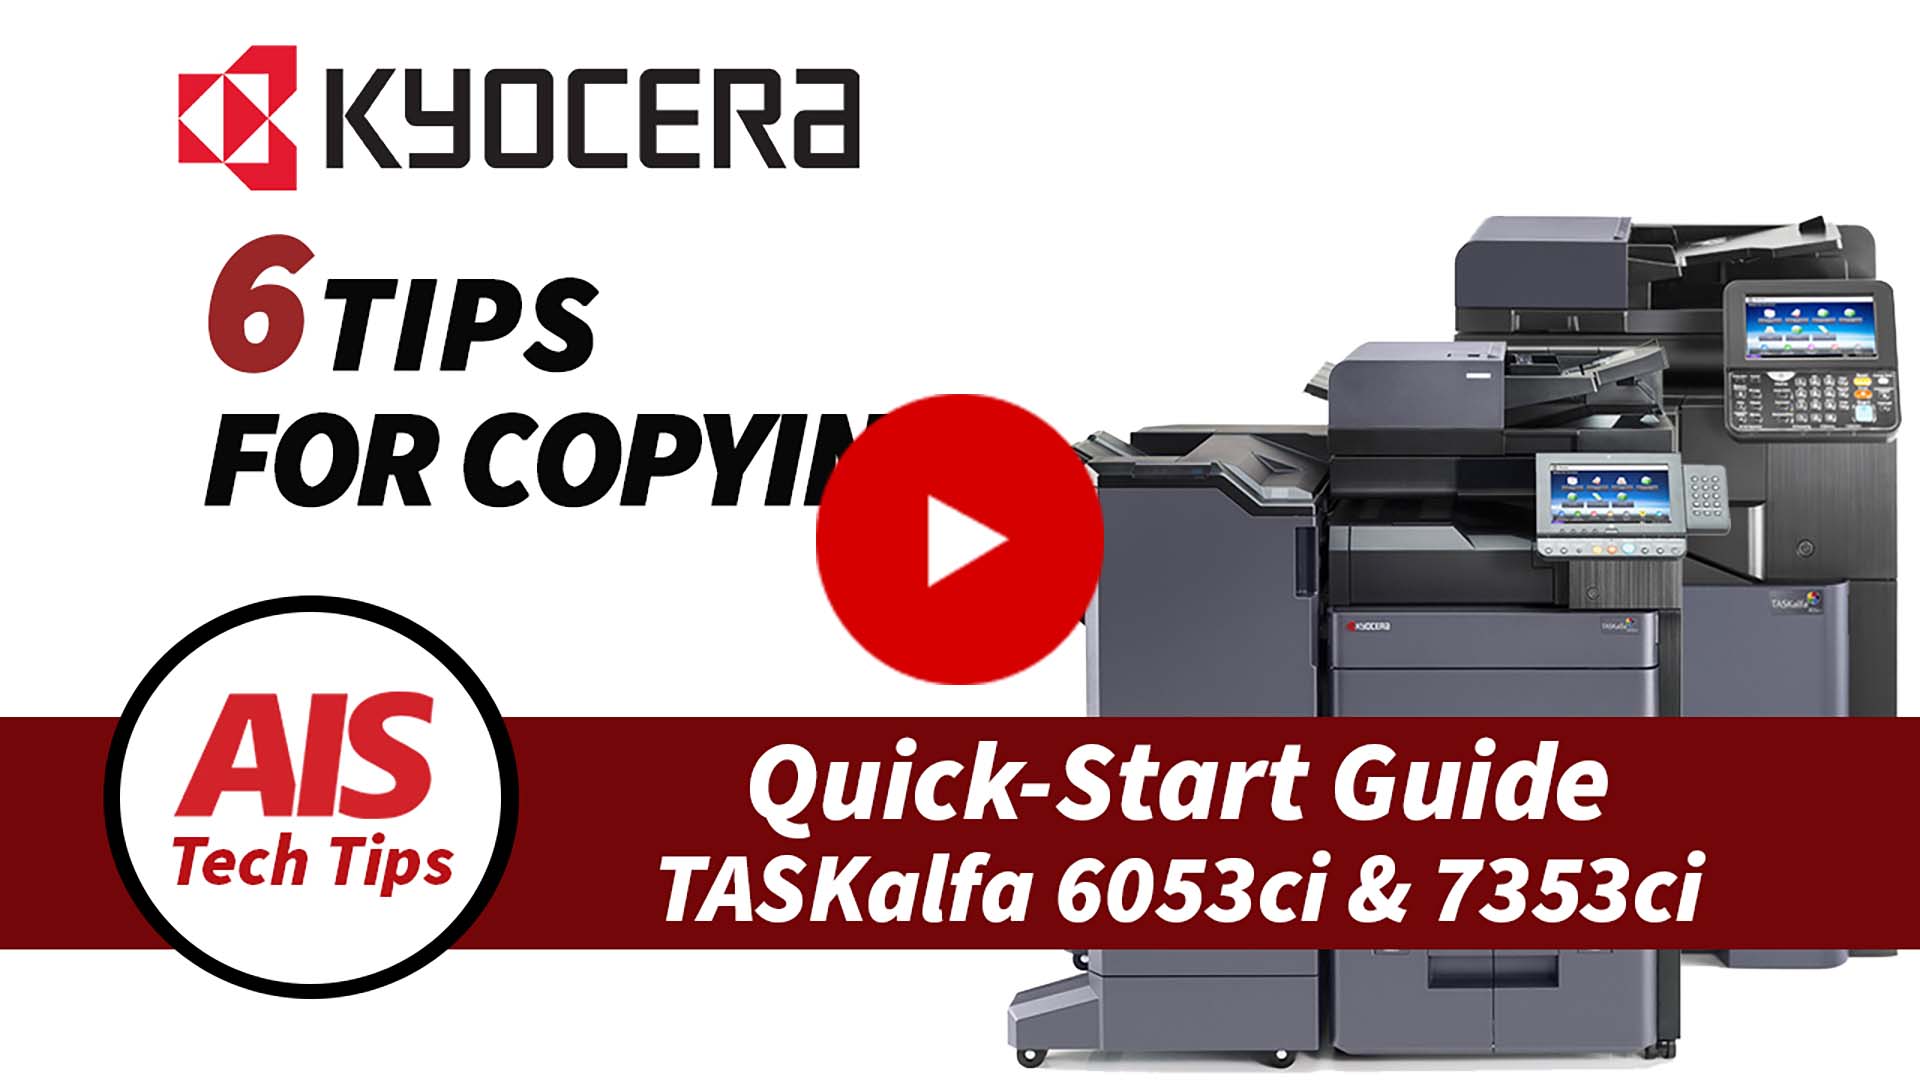 Kyocera Quick-Start Guide - Copying